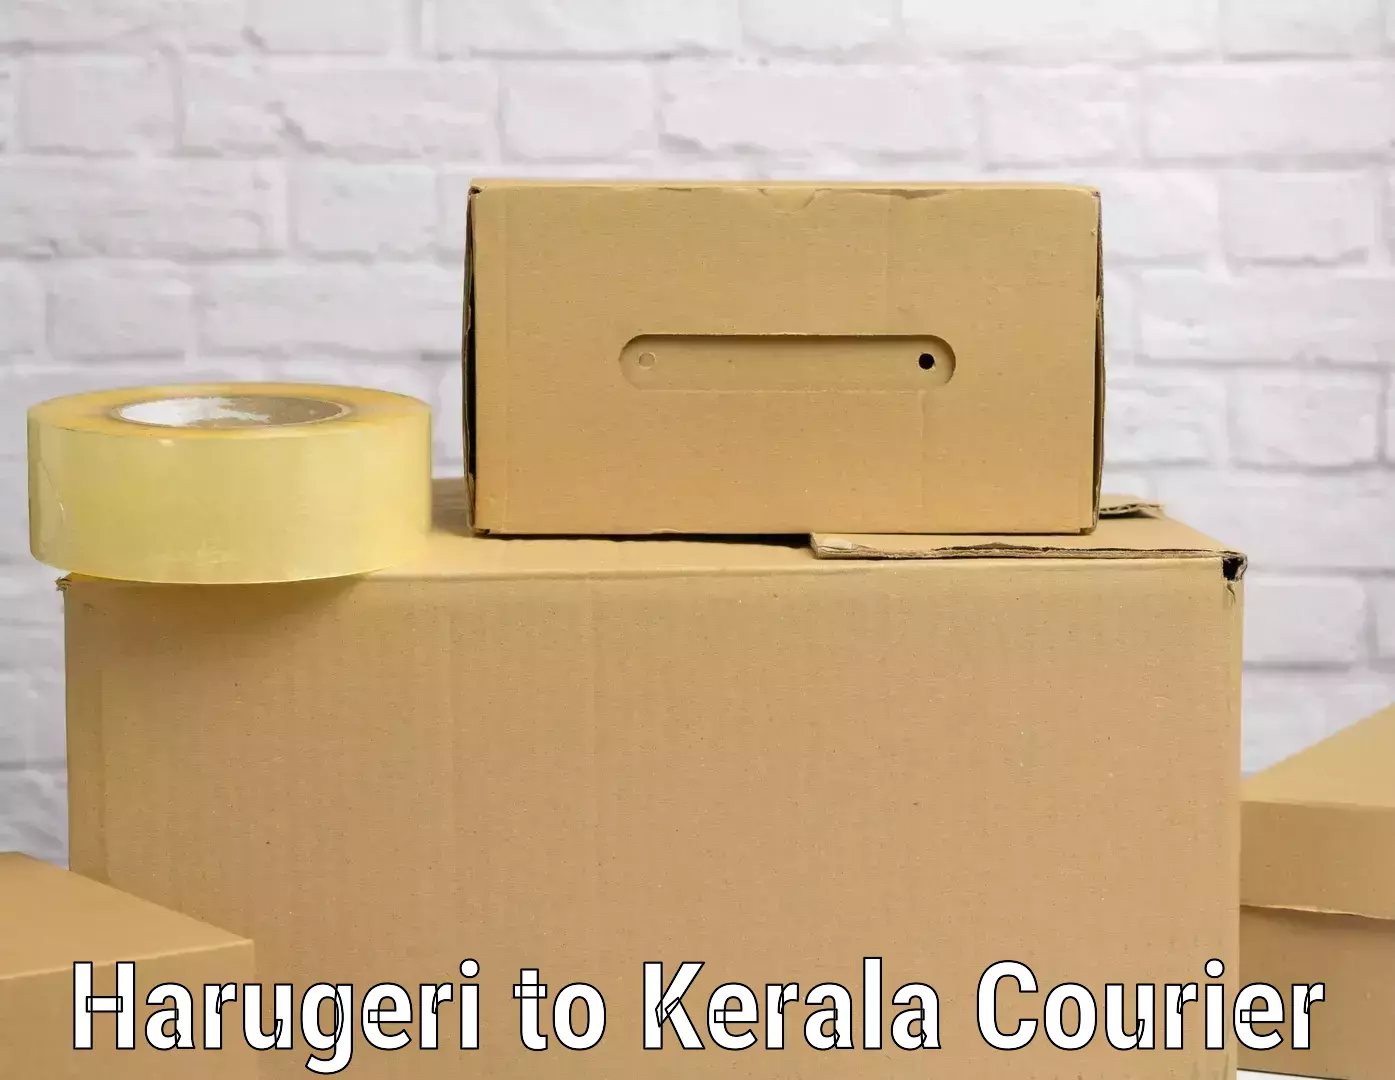 Fast track baggage delivery Harugeri to Kerala